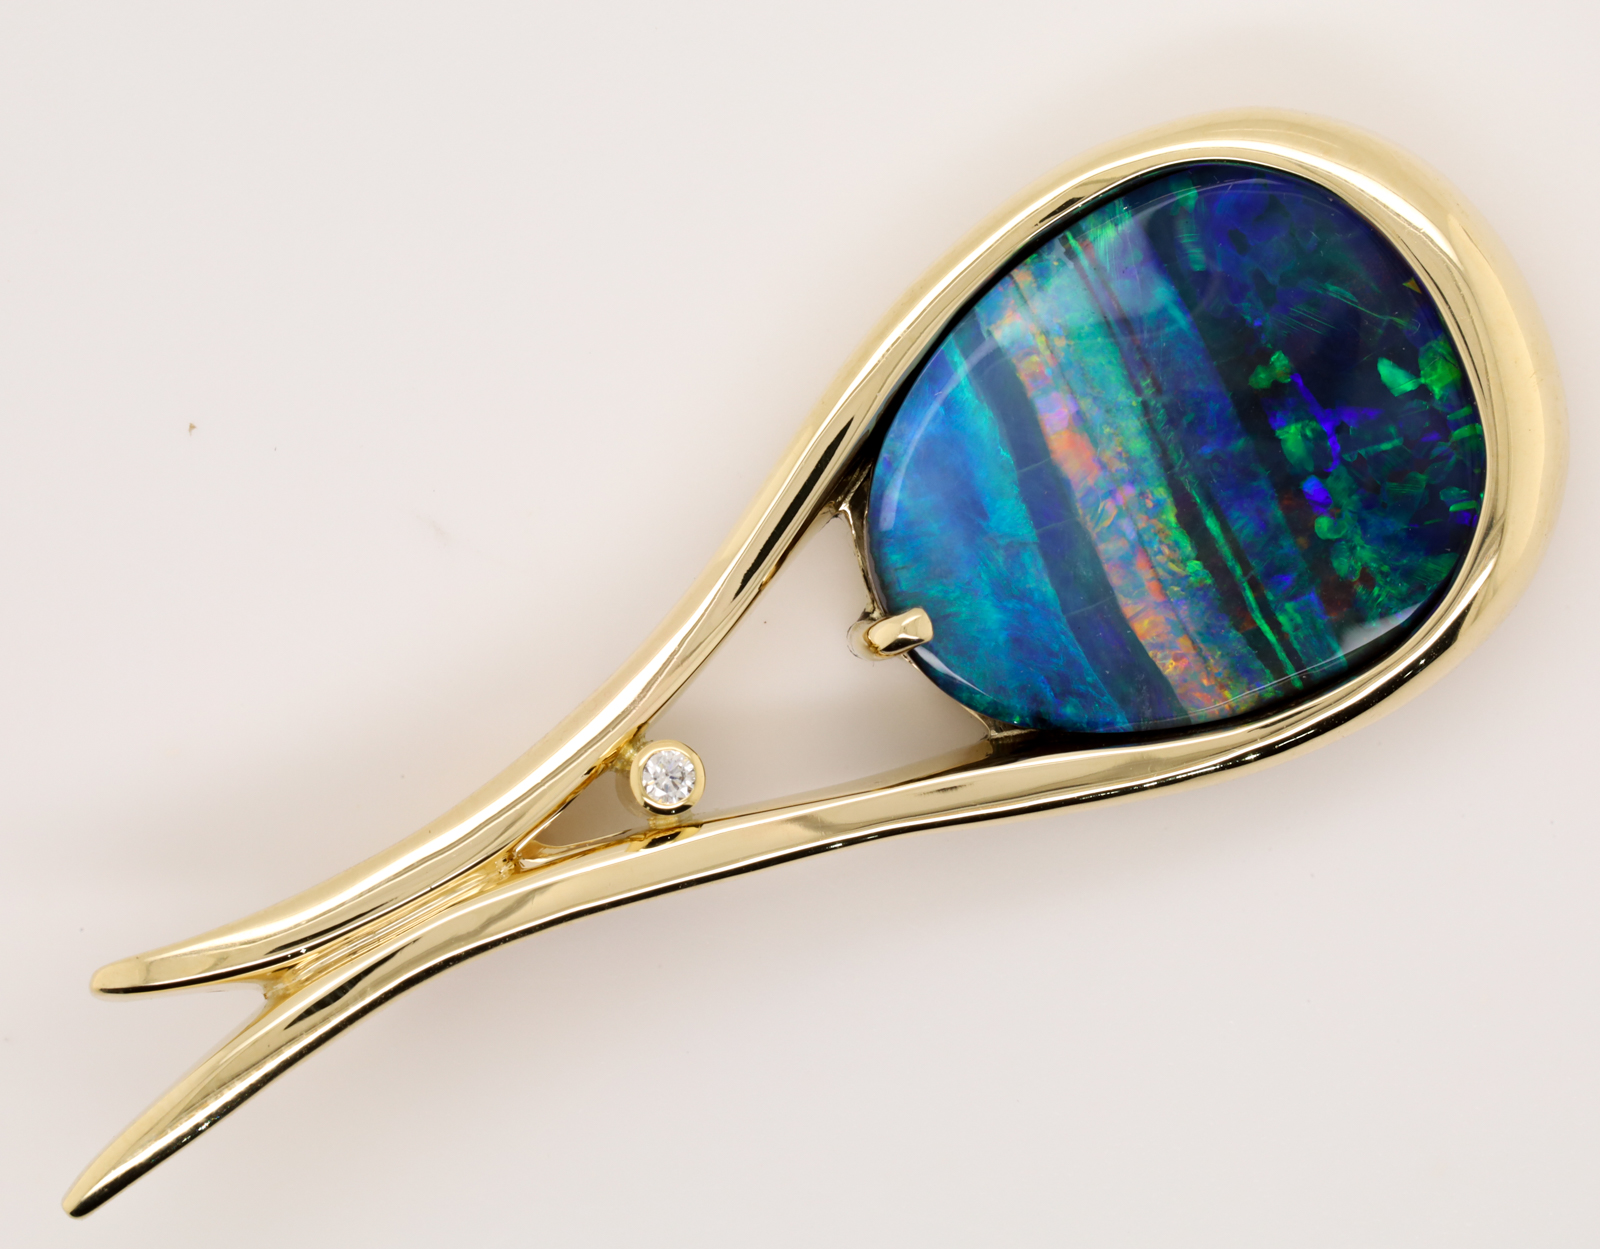 Yellow Gold Blue Green Red Solid Australian Boulder Opal Diamond Necklace Pendant